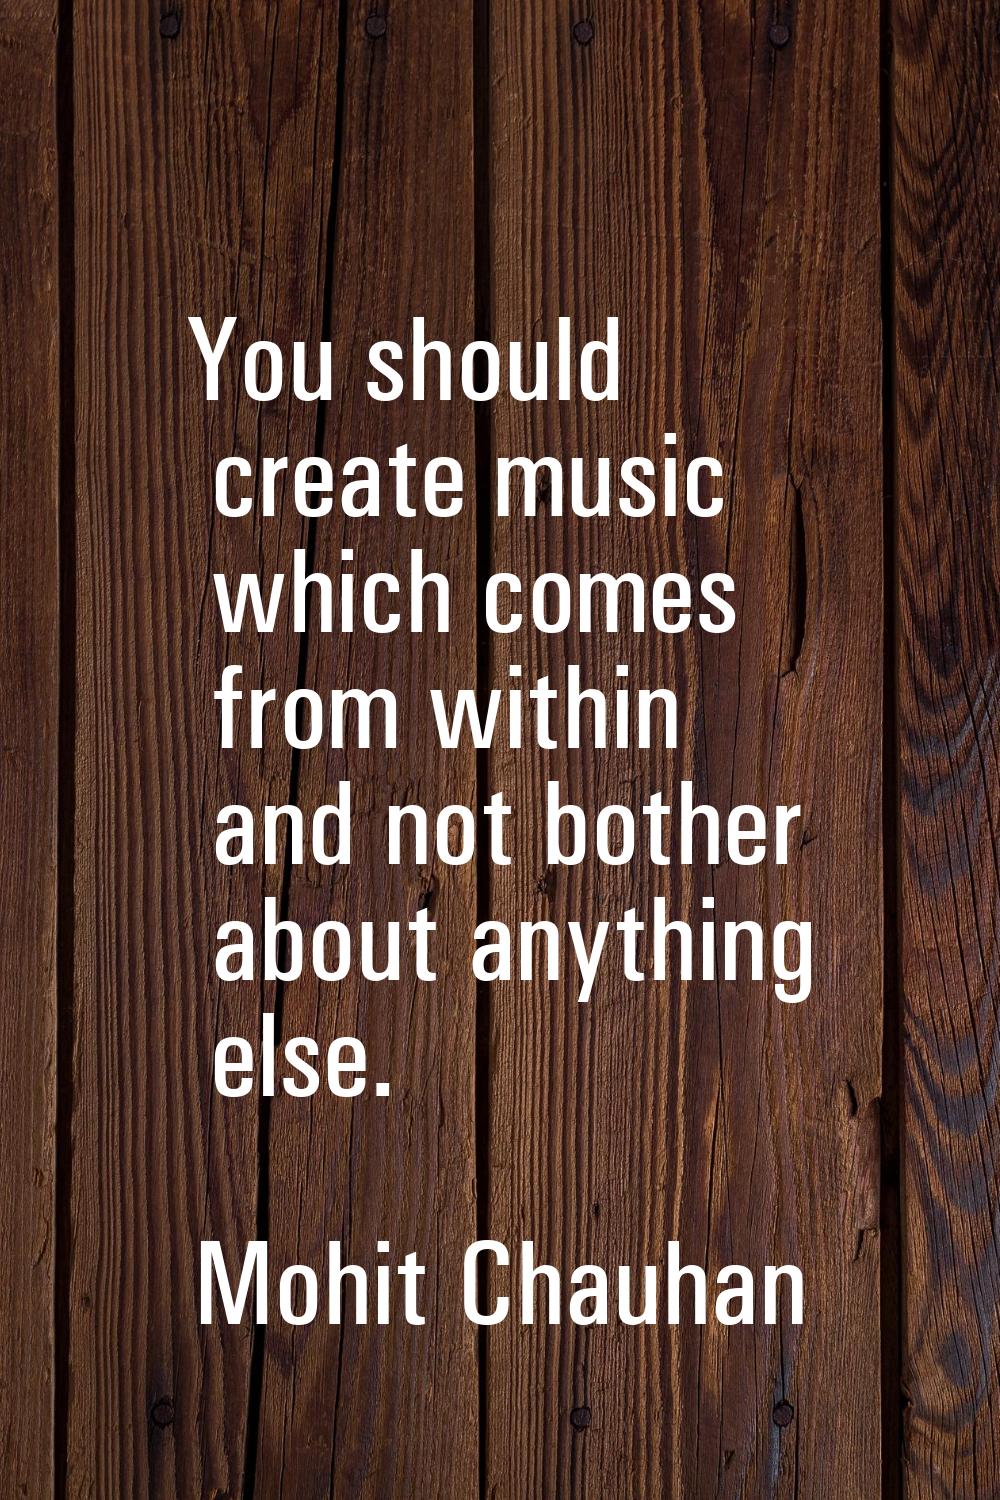 You should create music which comes from within and not bother about anything else.